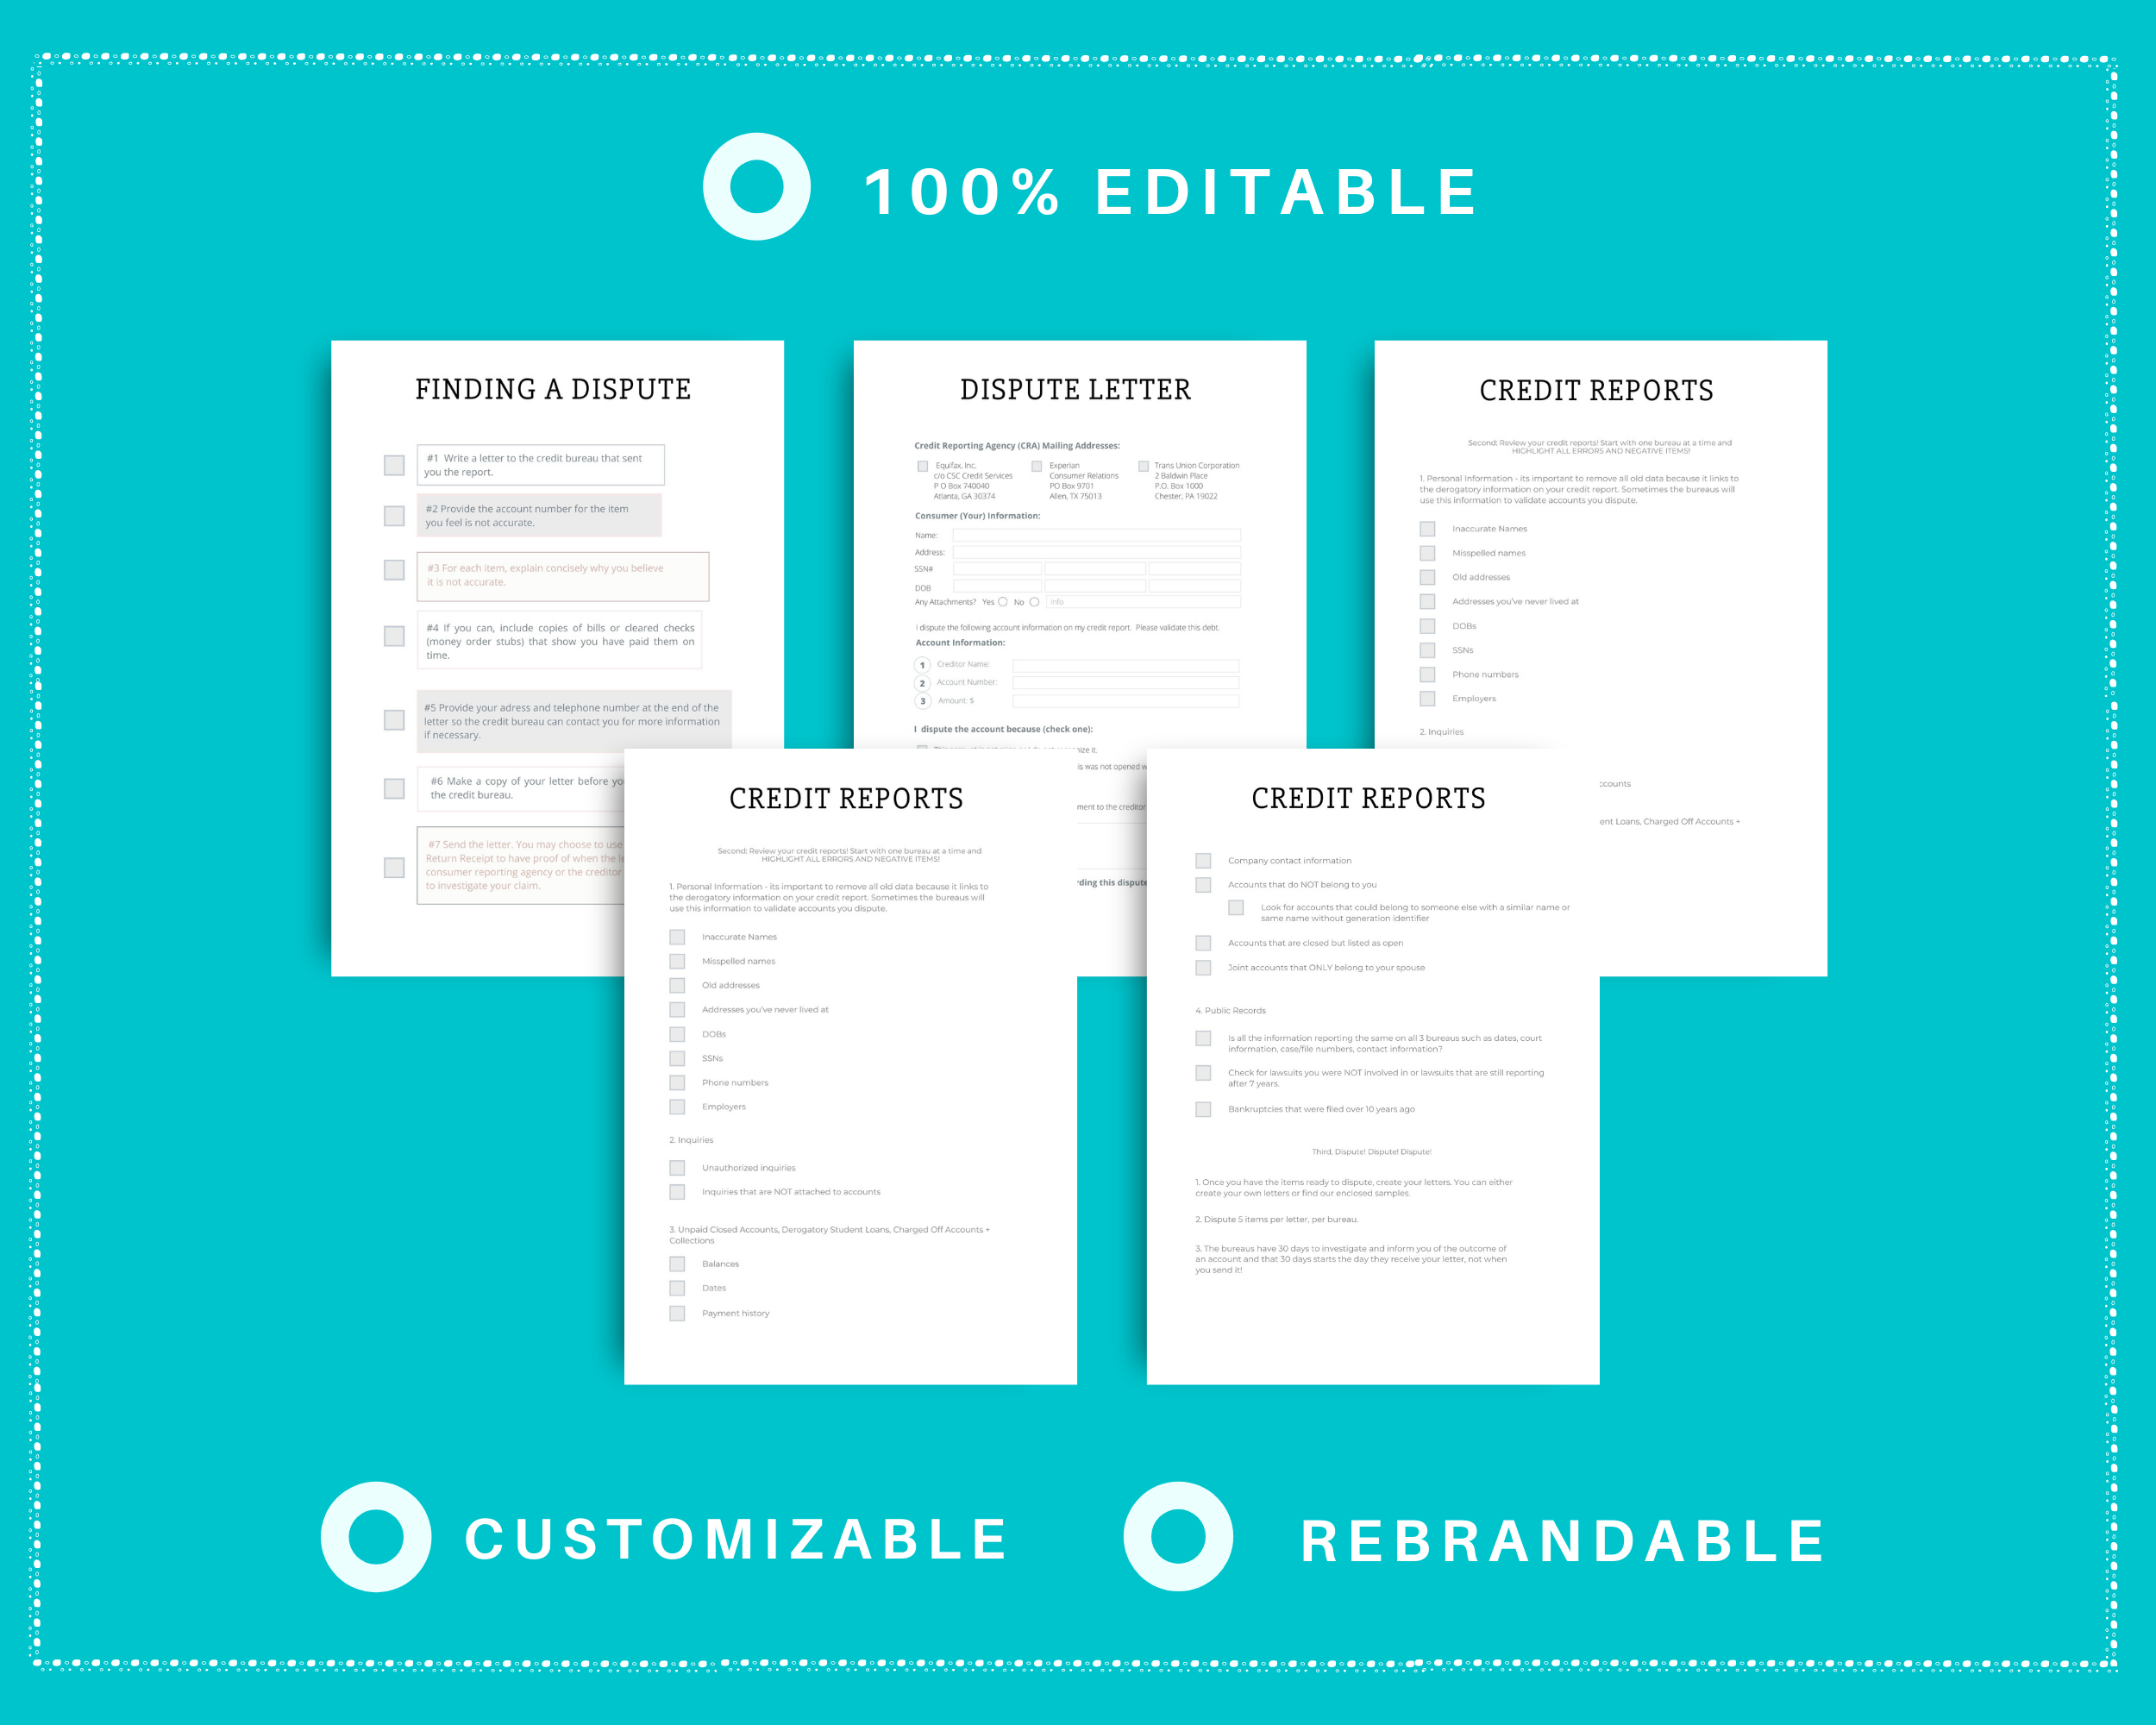 Editable Credit Repair Planner in Canva | Commercial Use